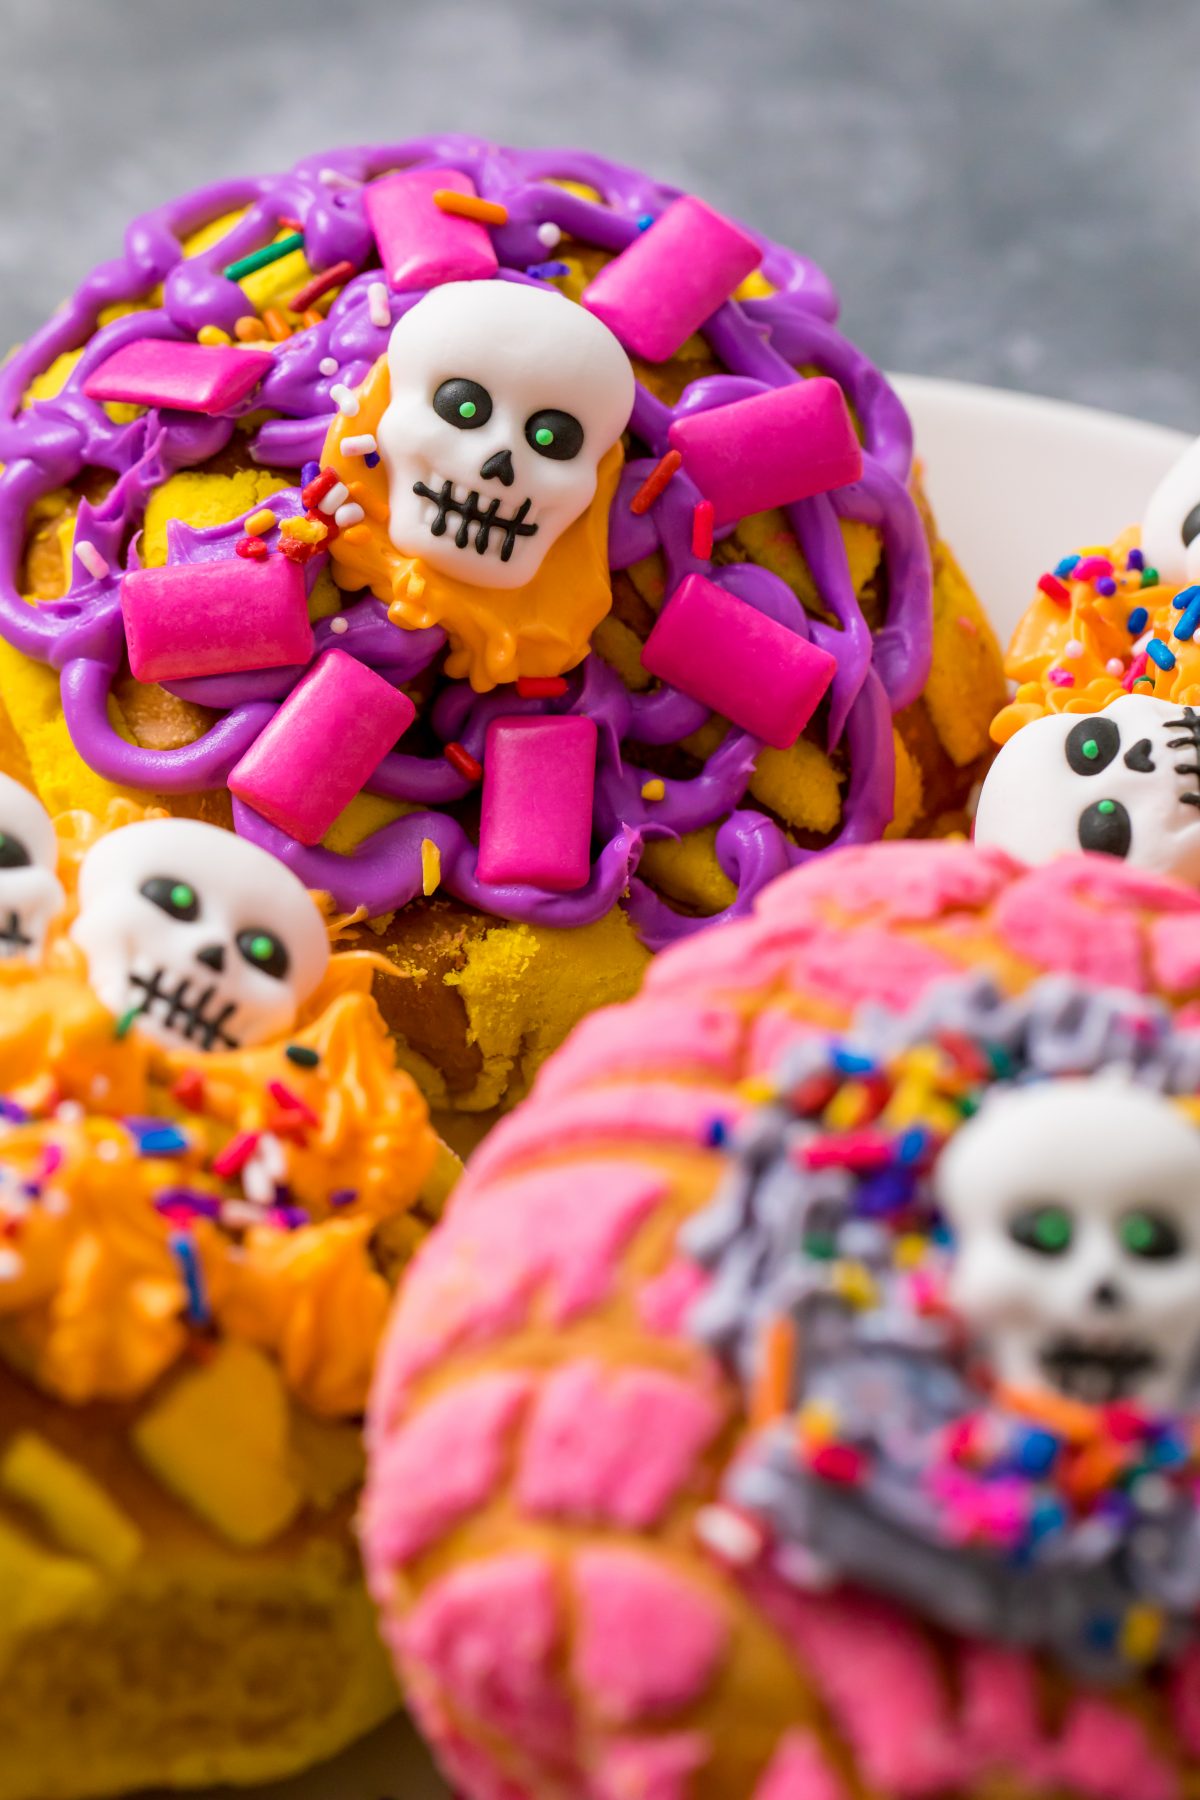 5D4B6526 - Crafty Chica - Day of the Dead Conchas - Makes for a tasty treat and fun activity for the kiddos!